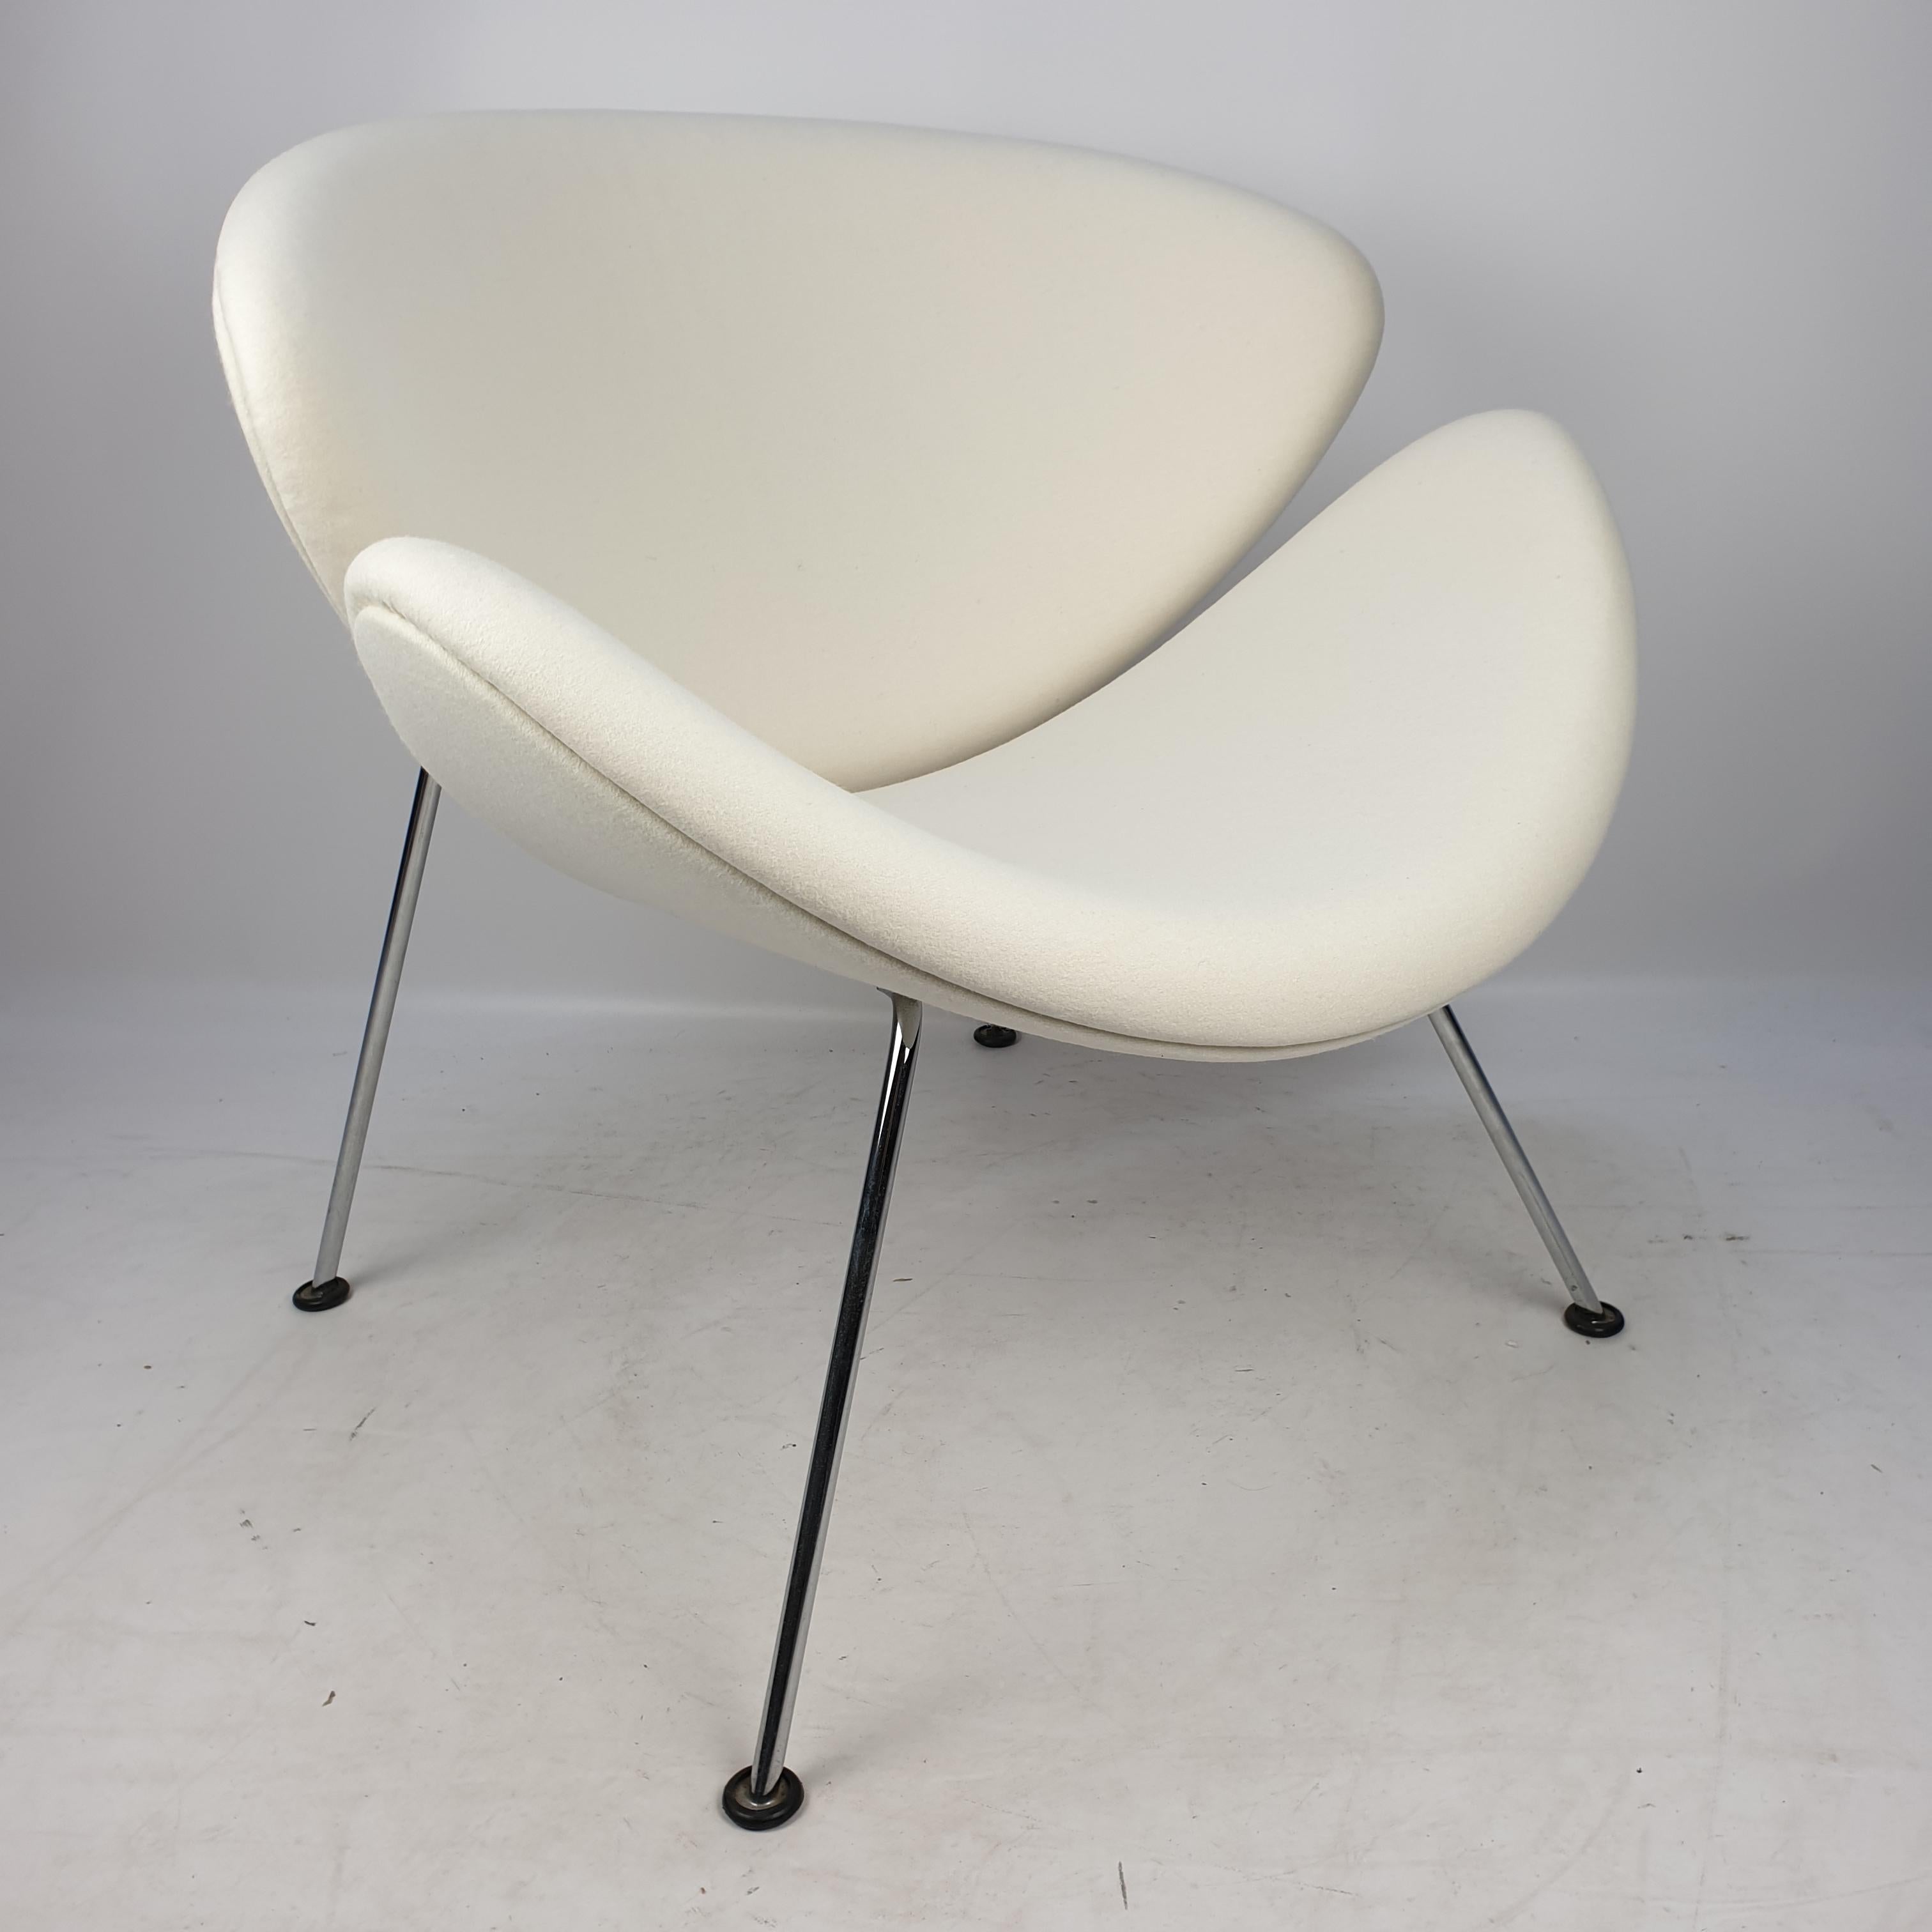 The famous Artifort Orange slice chair by Pierre Paulin. Designed in the 60's and produced in the 80's. Cute and very comfortable chair. It has chrome metal legs. The structure is in very good condition. The chair has new foam and has just been